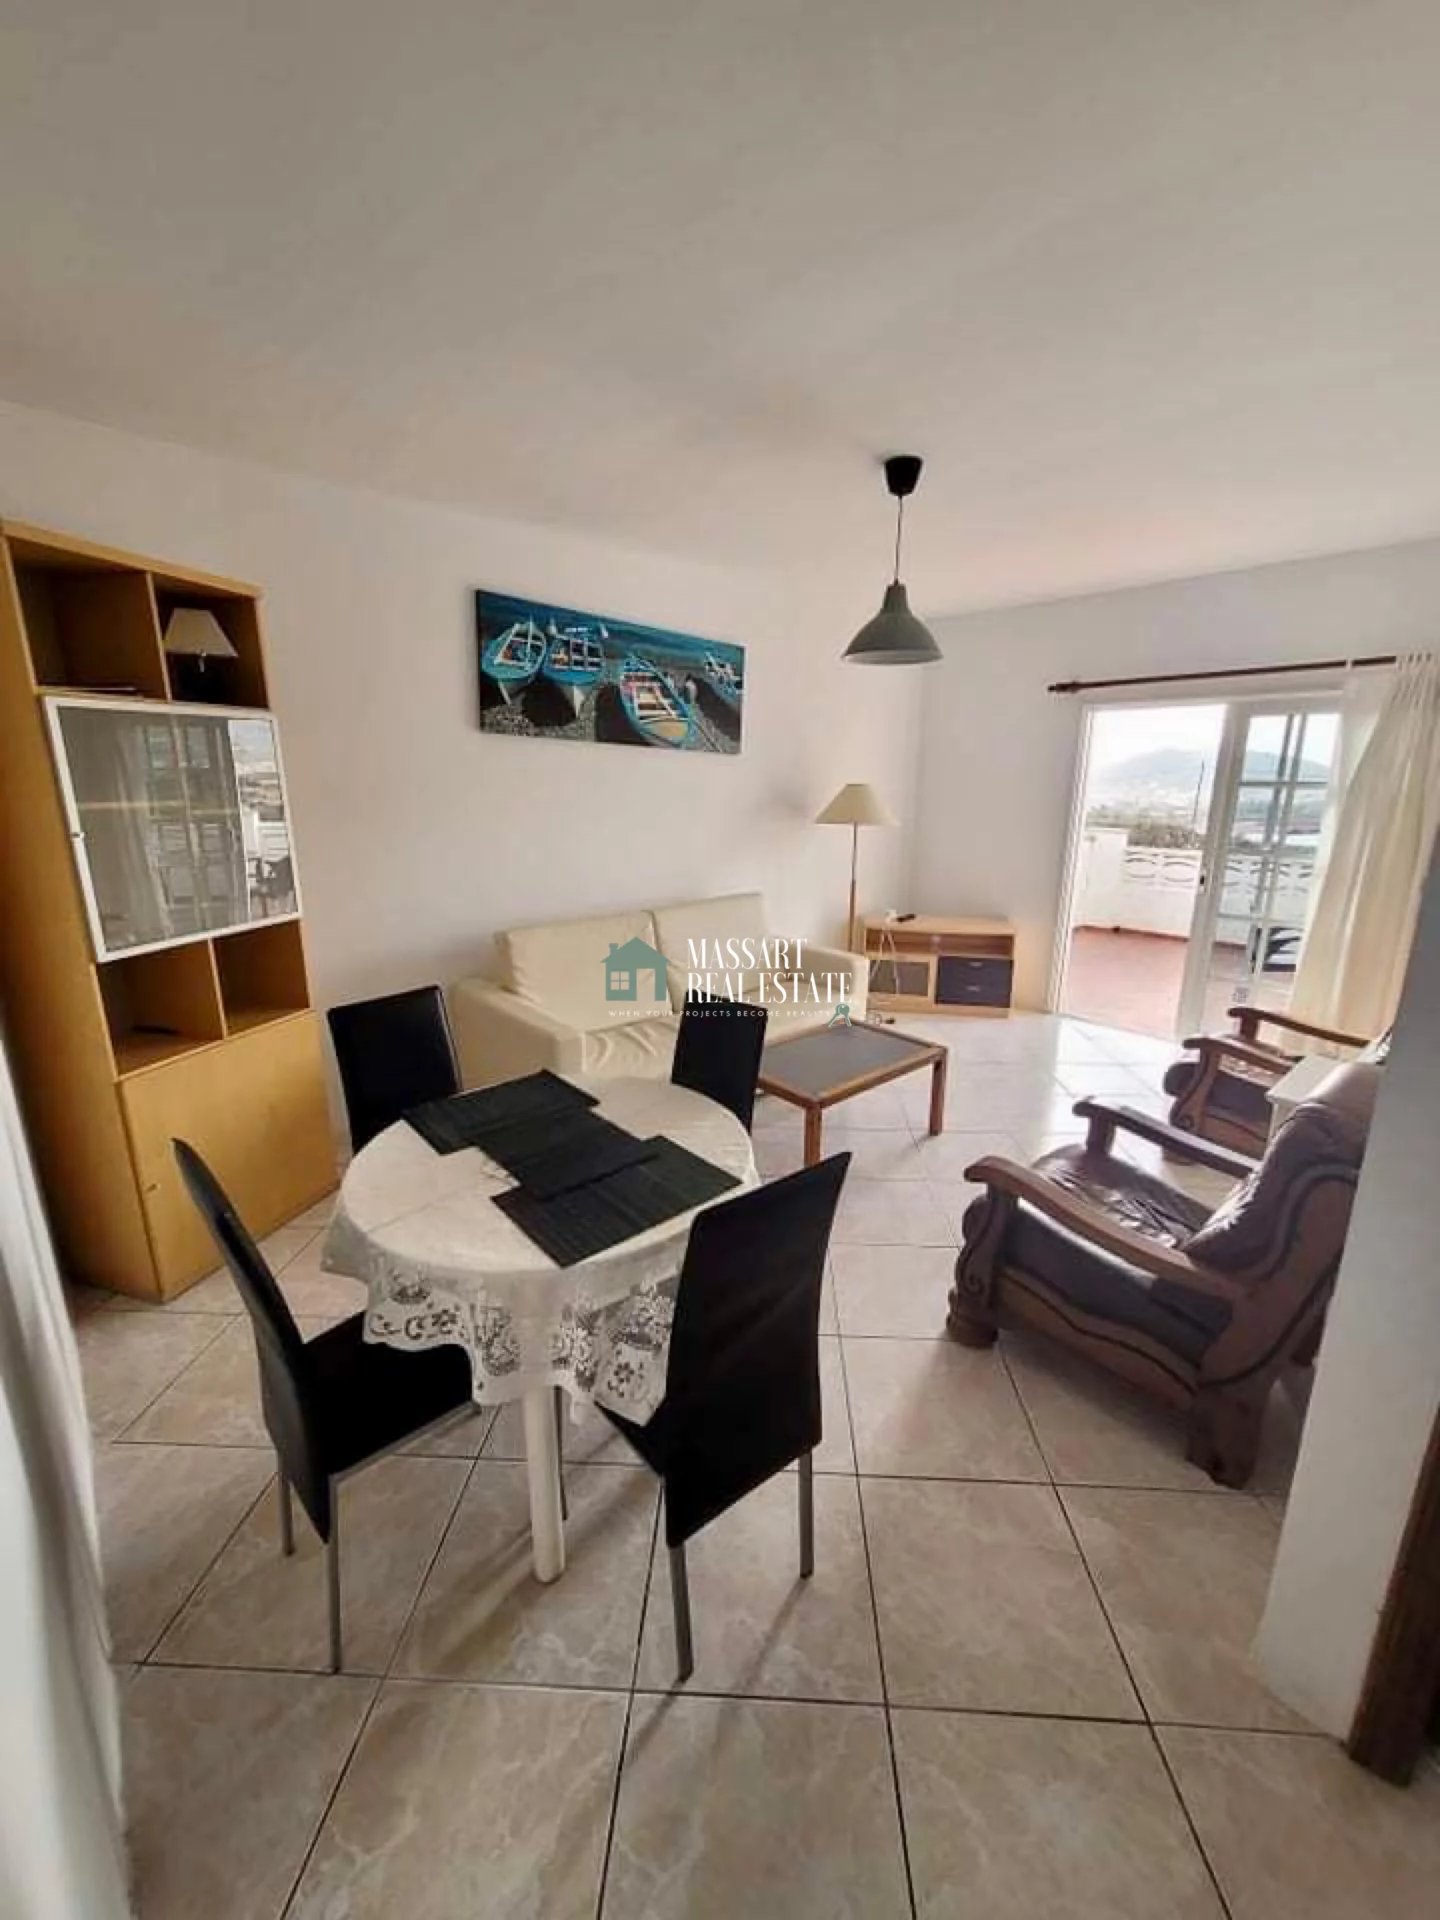 House divided into 4 apartments located on a 900 m2 plot in Buzanada, in a central and quiet area.